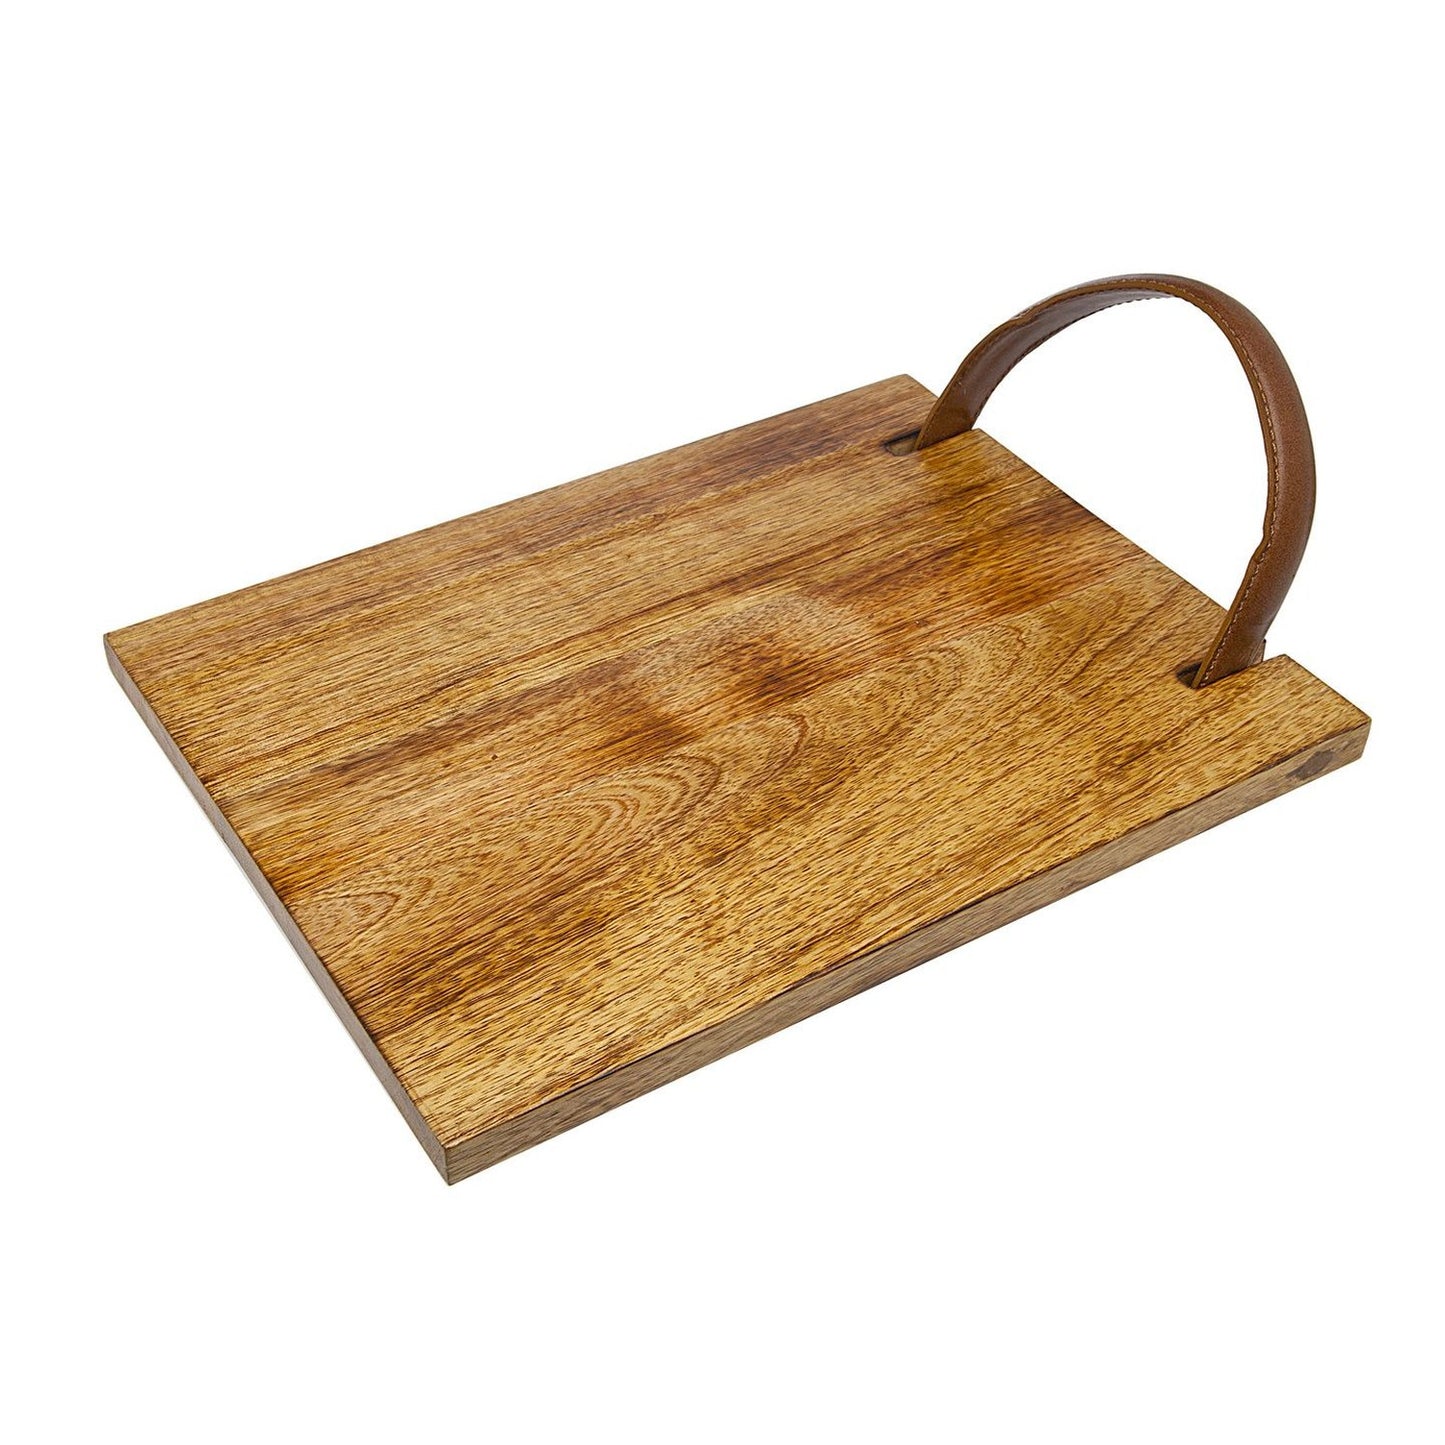 Godinger Wooden Tray Platter with Leather Handle